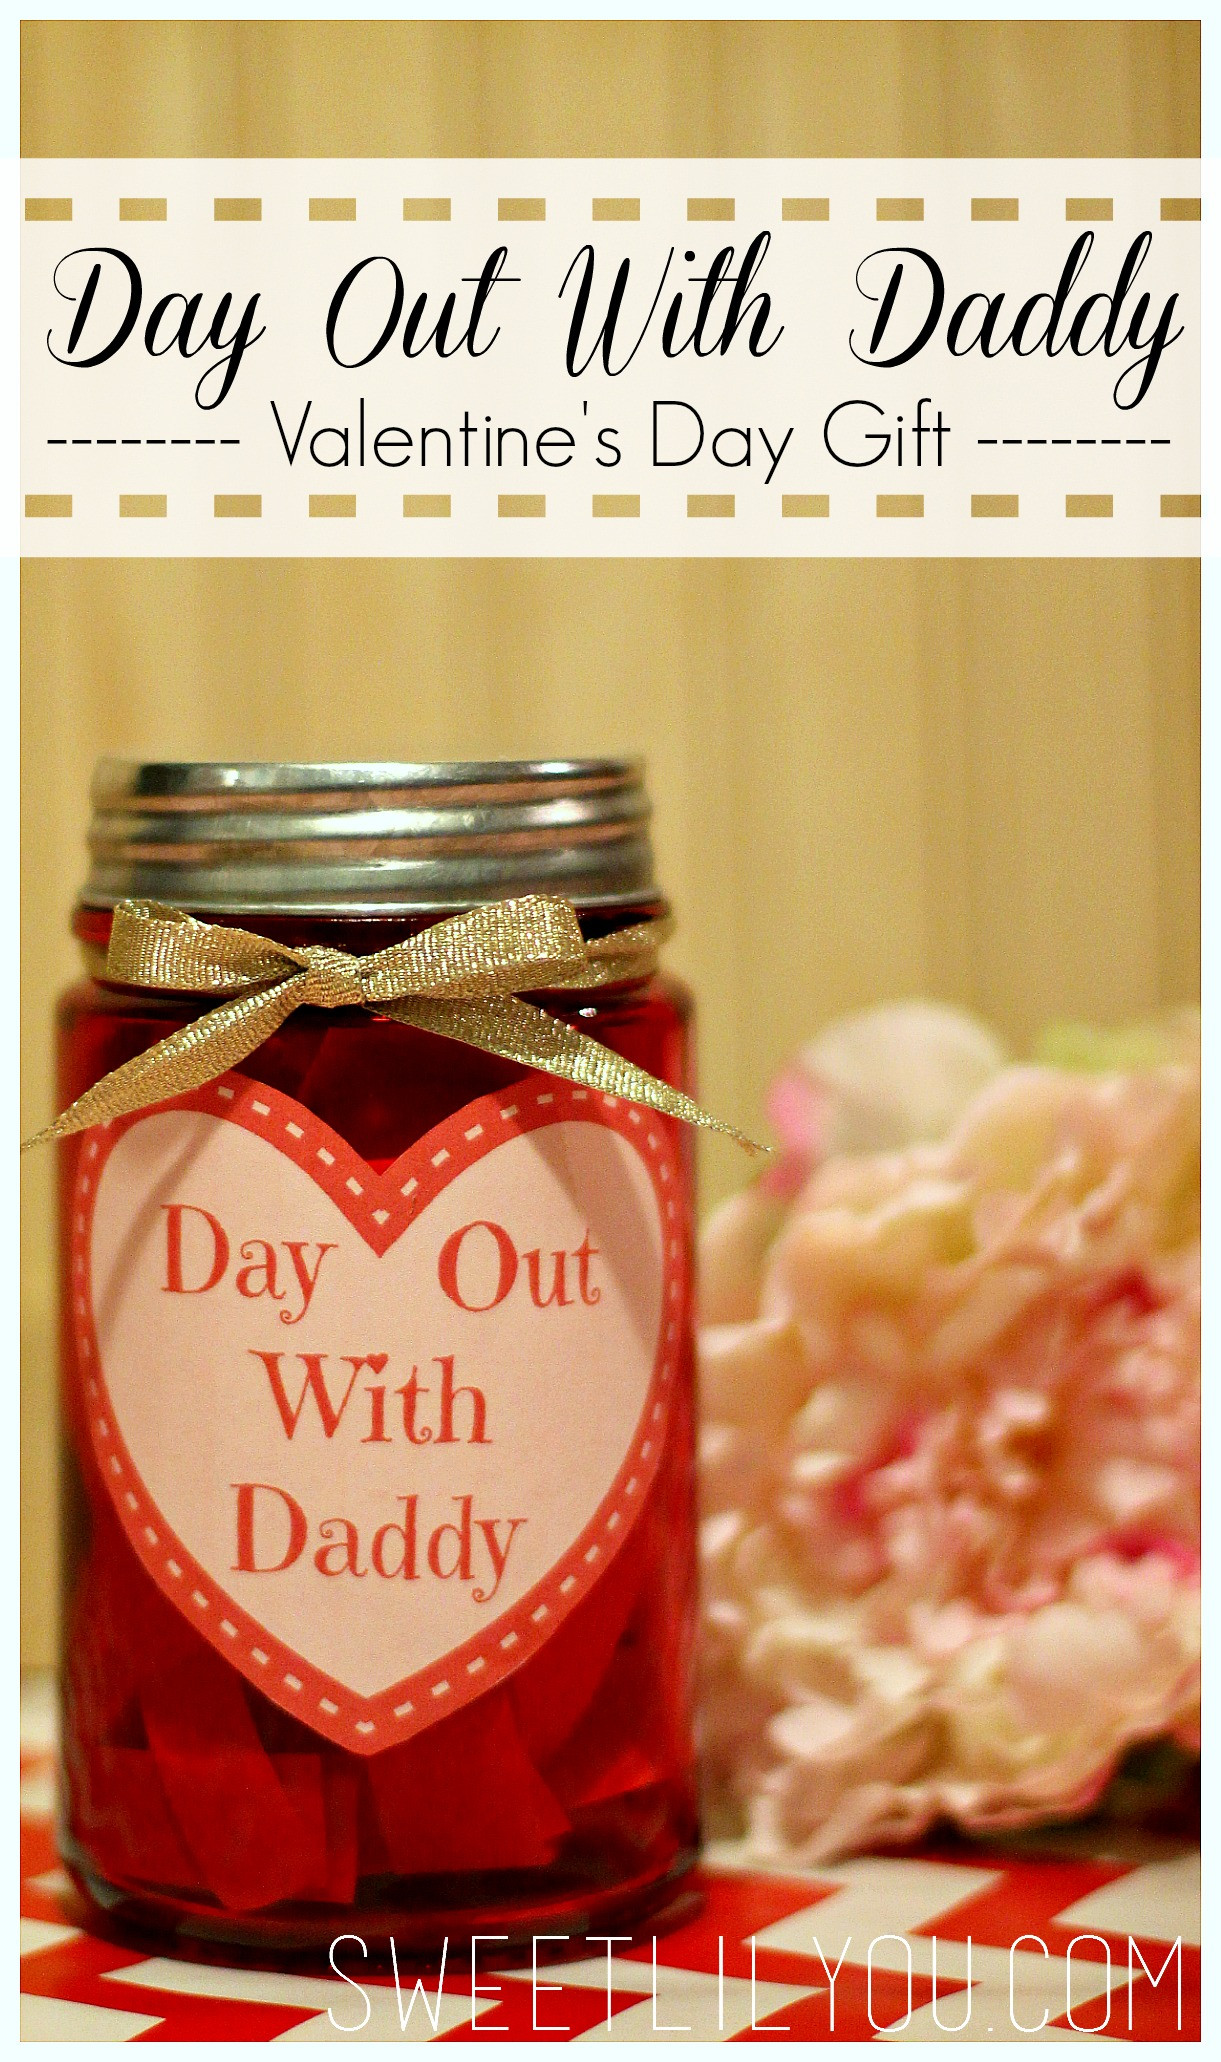 Valentine Gift Ideas For Father
 Day Out With Daddy Jar Valentine s Day Gift for Dad